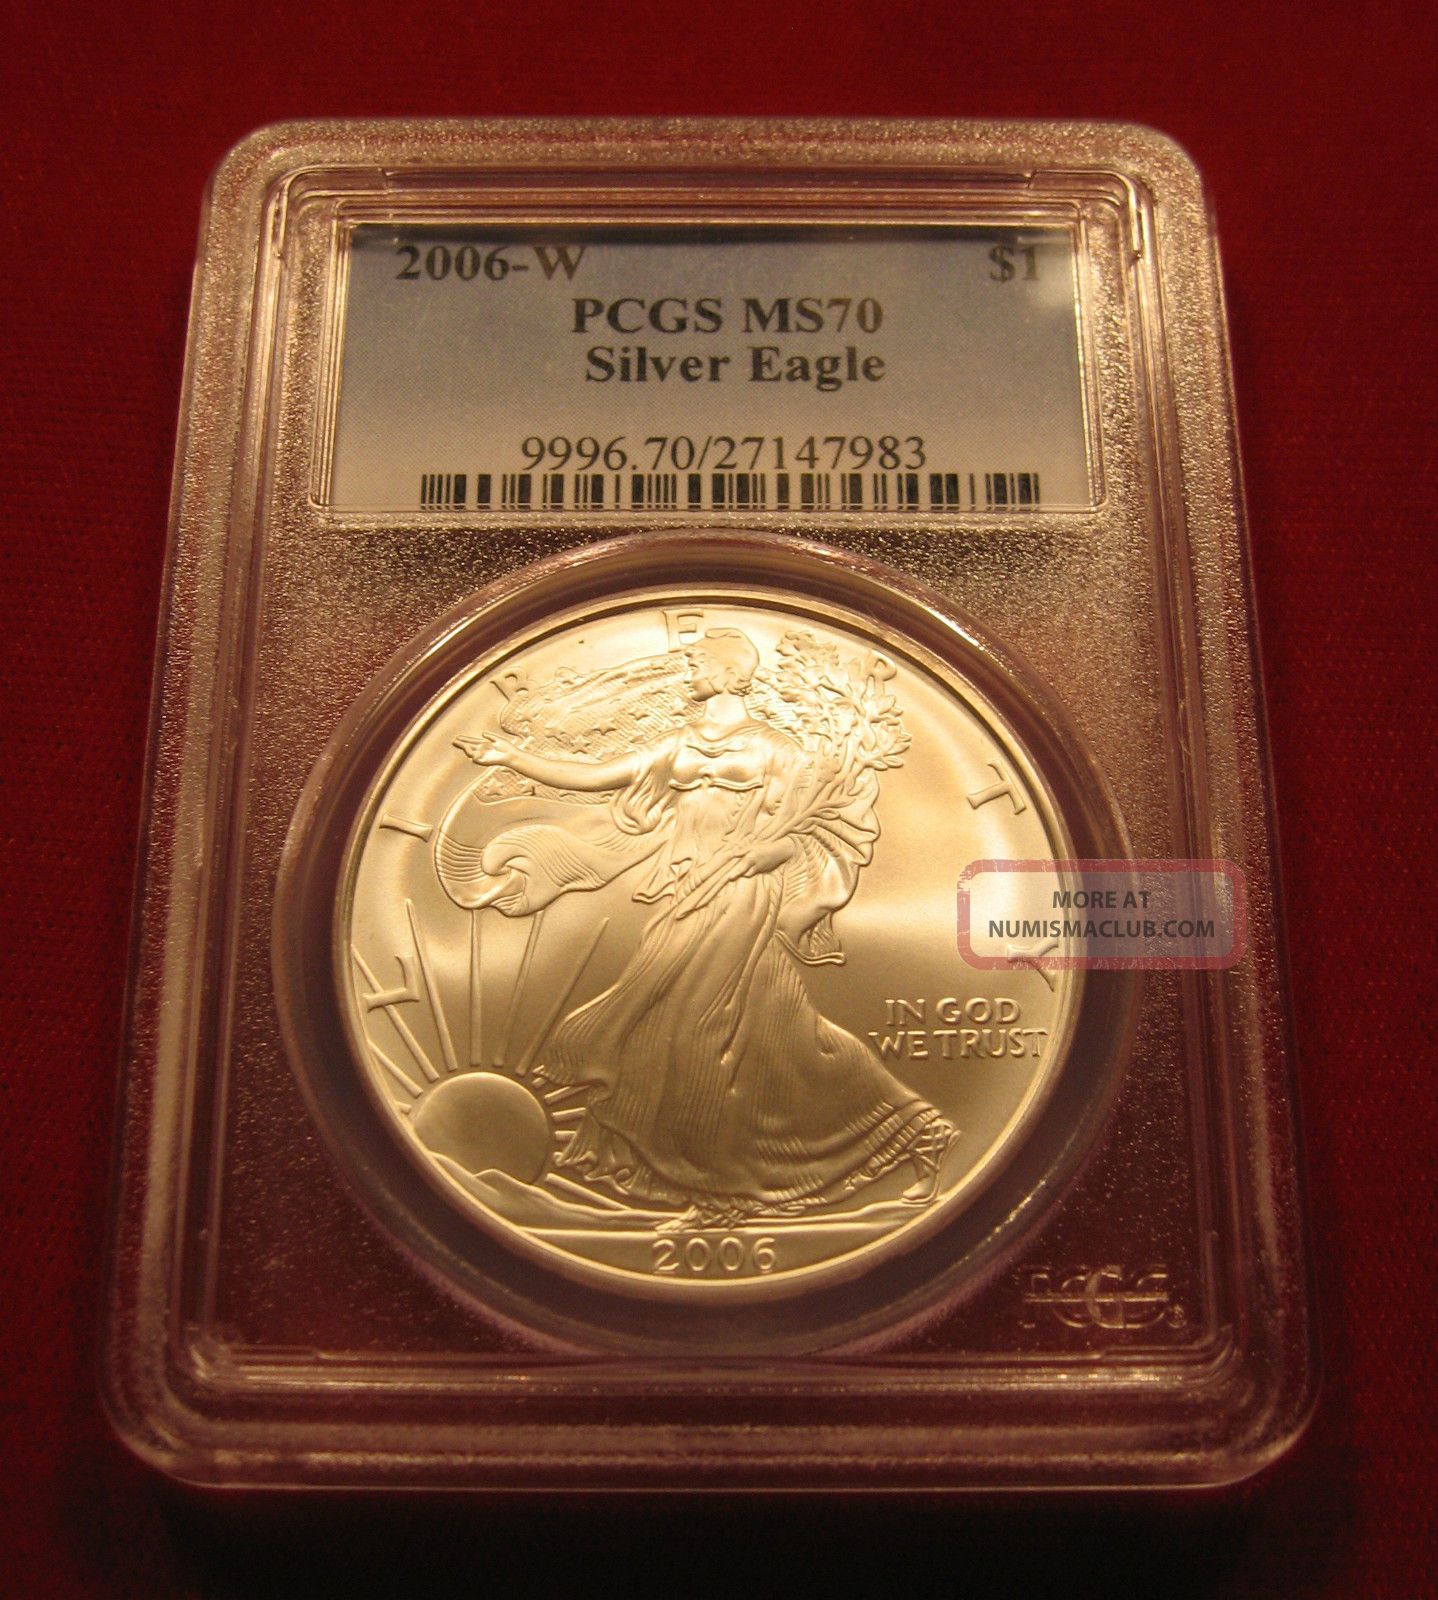 2006 - W $1 Burnished Silver American Eagle Coin Pcgs Ms70 Incredible